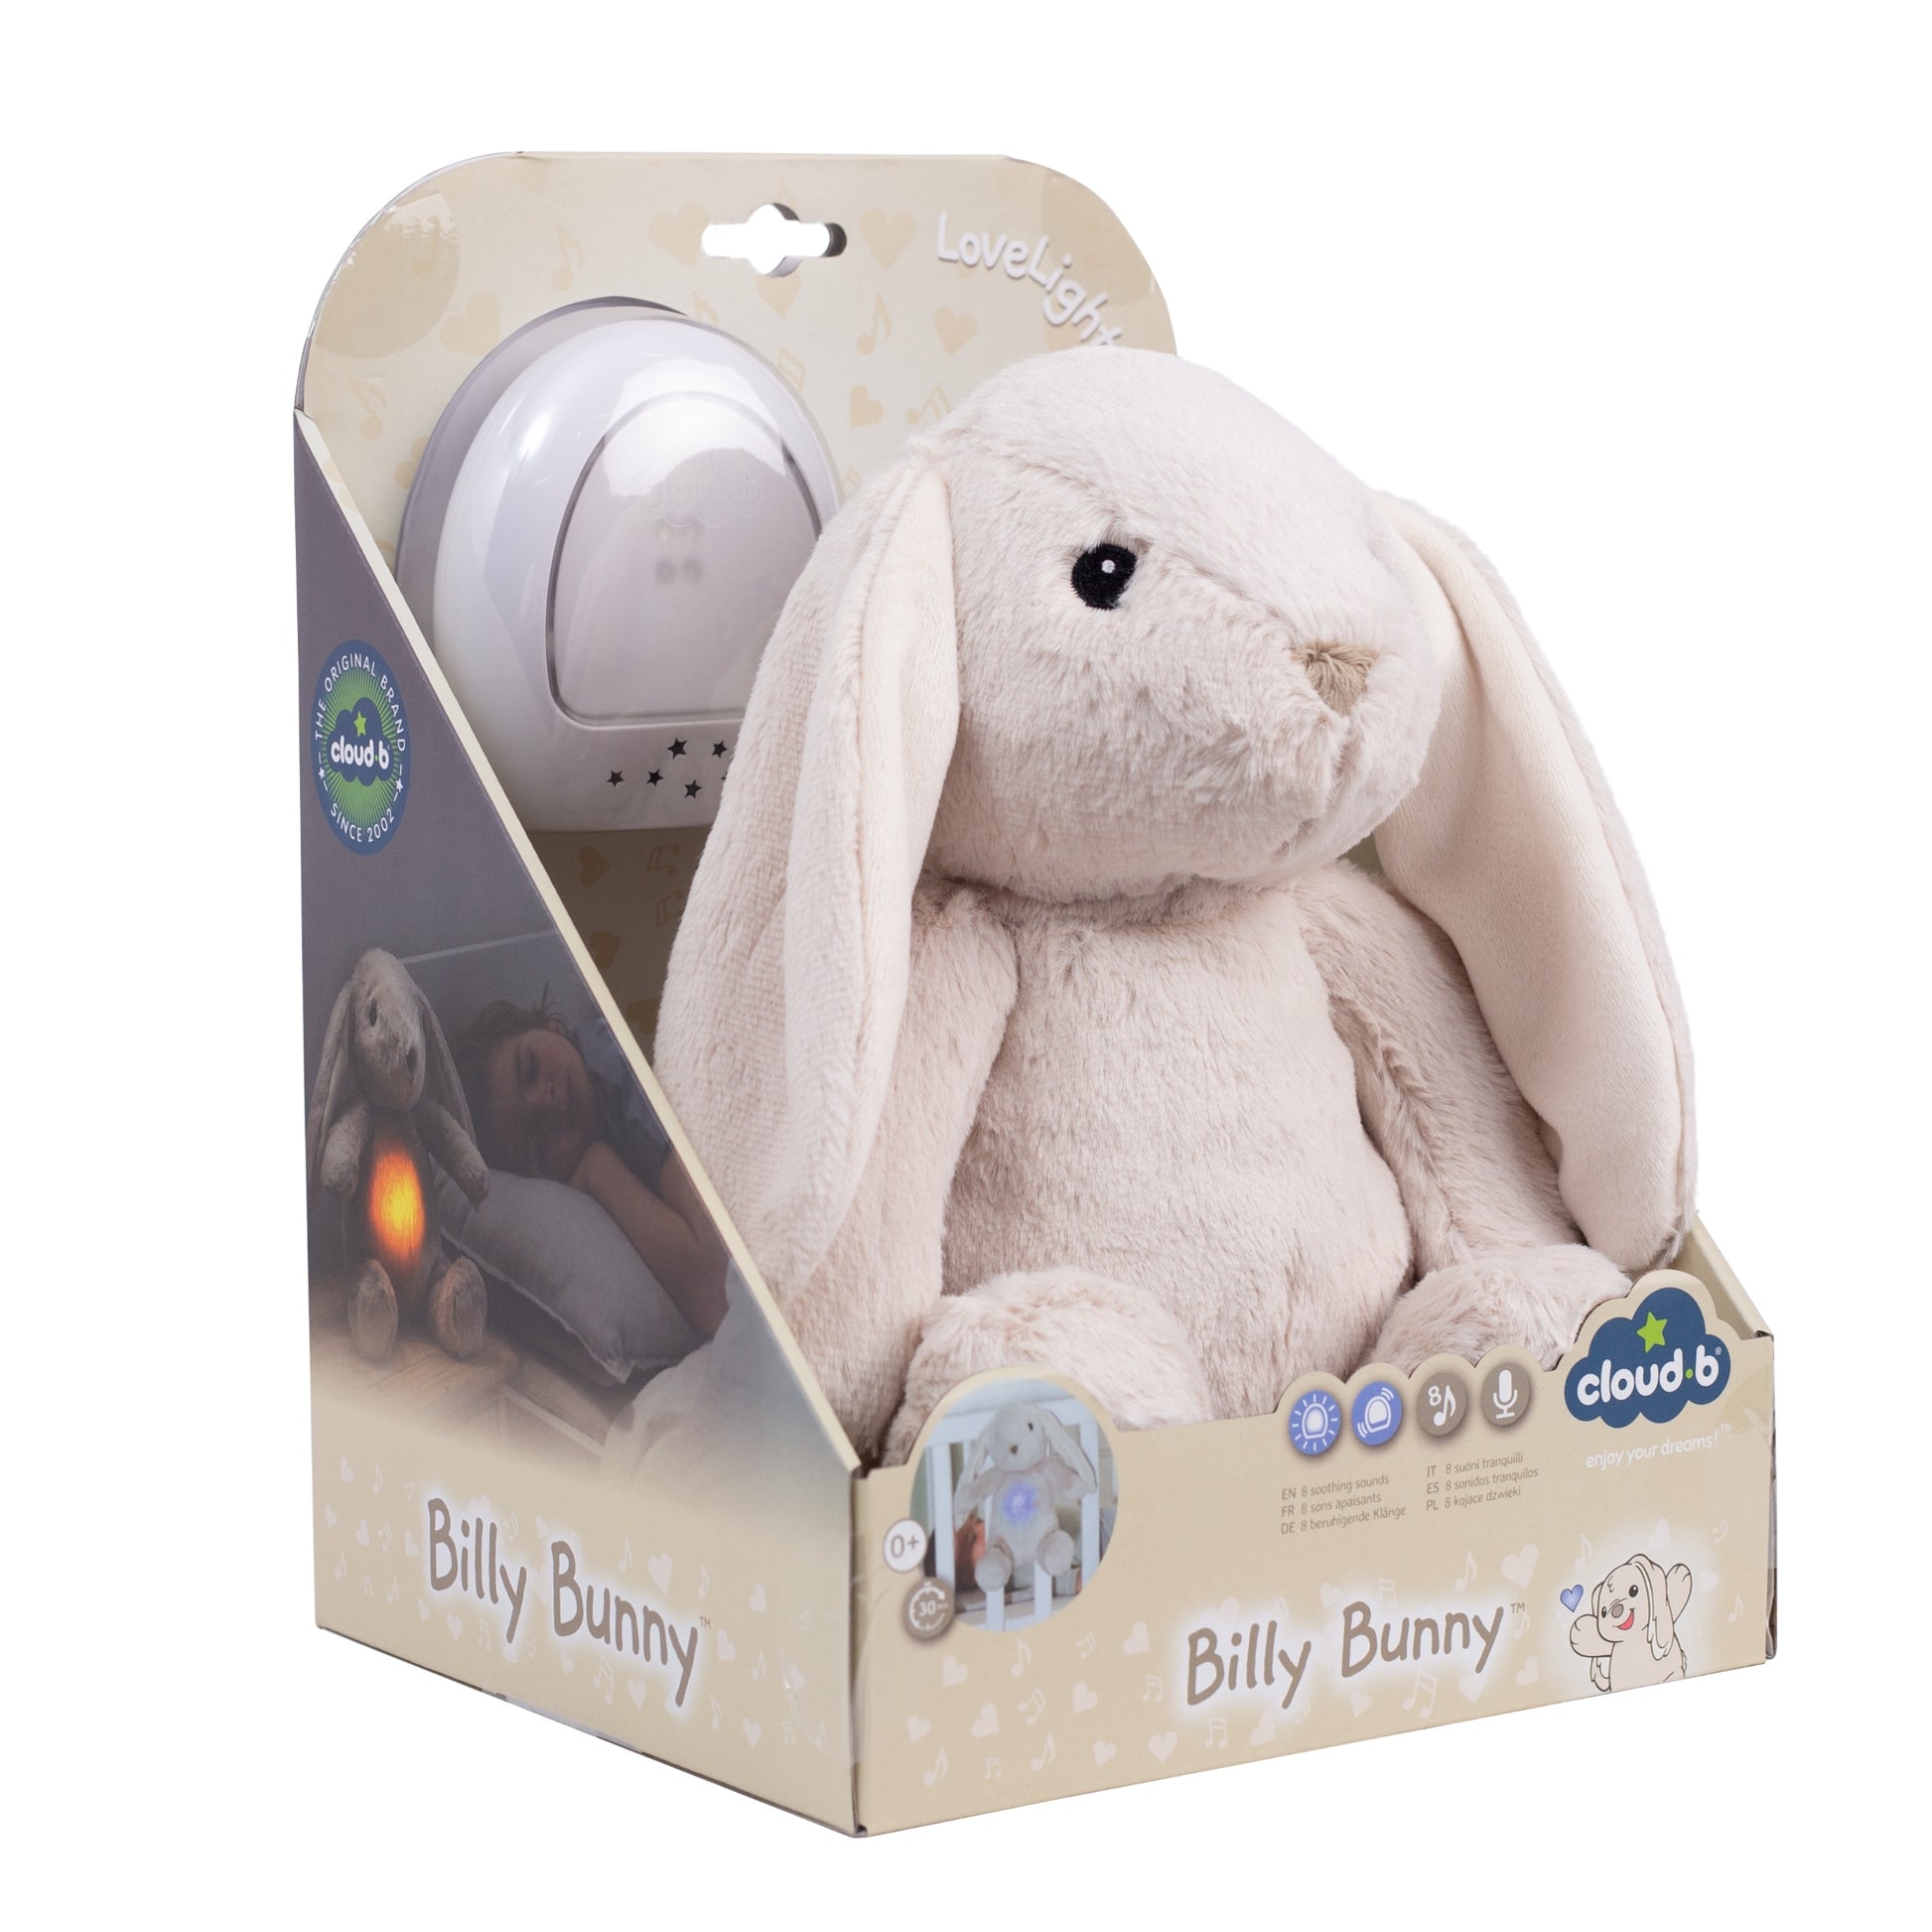 Love Light Buddies - Billy Bunny Soothing Sound Machine-Cloud B-Do-Gree Generations